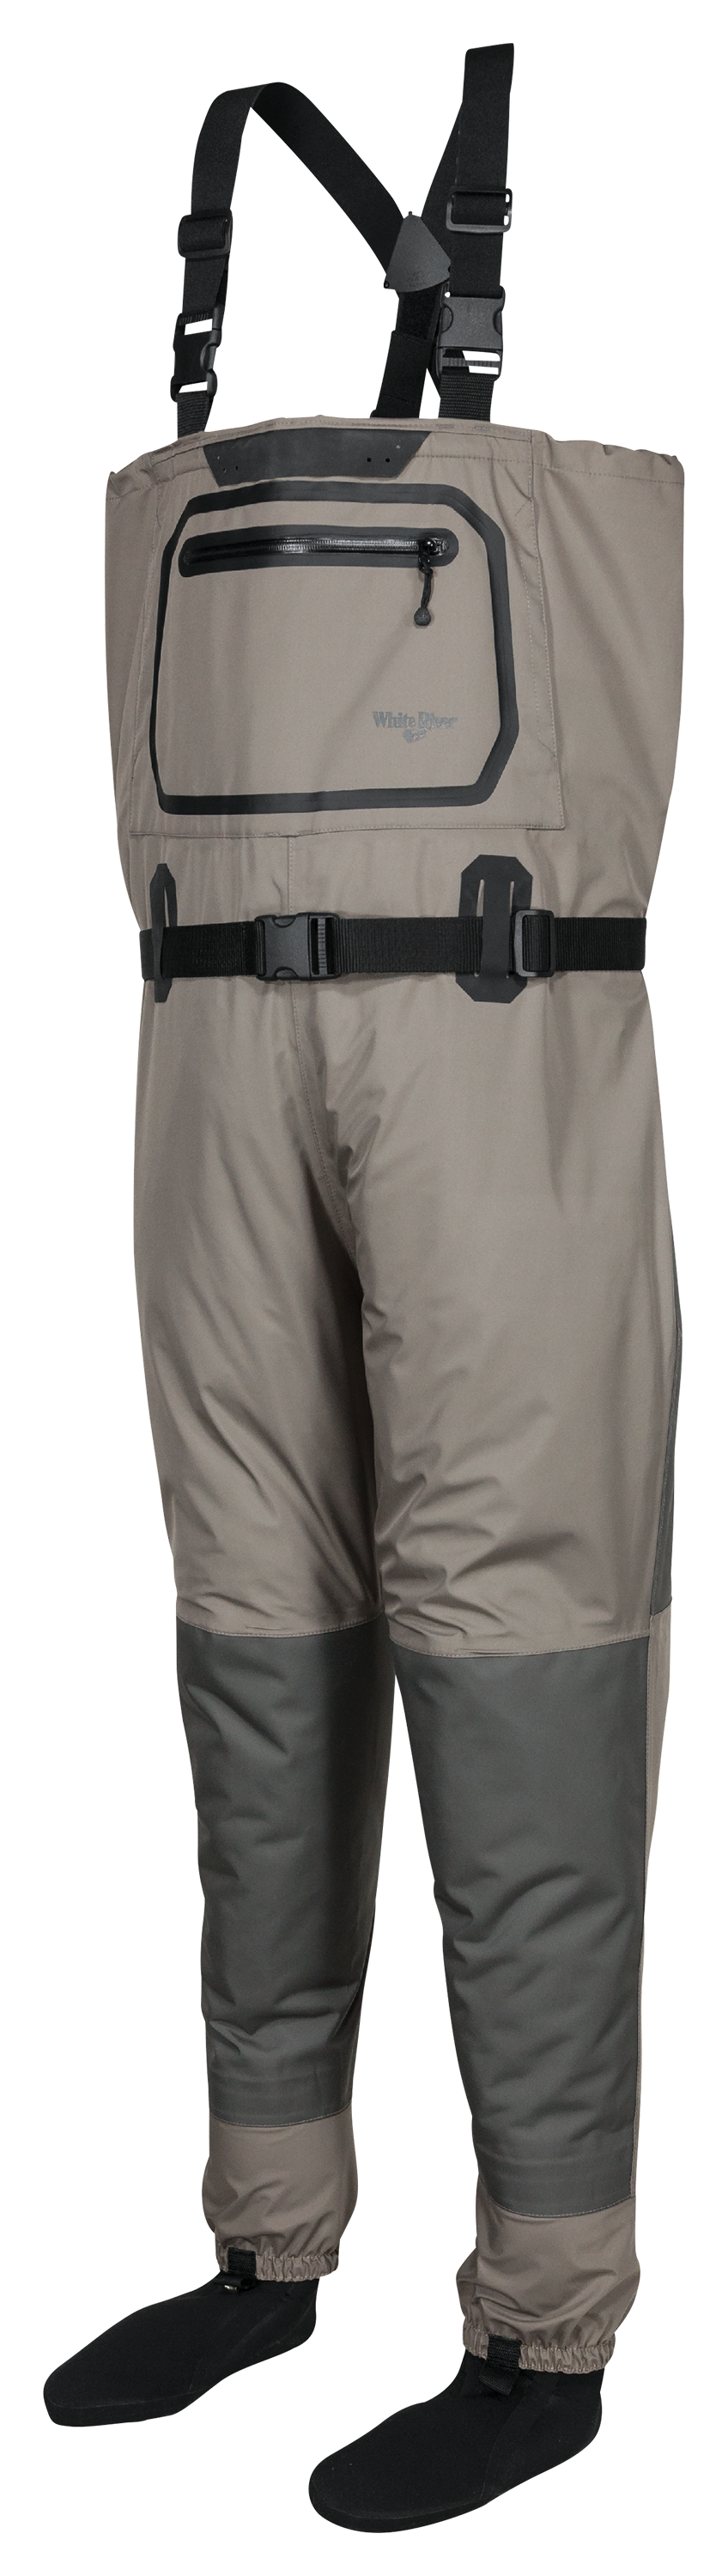 White River Fly Shop Osprey II Stocking-Foot Breathable Waders for Men